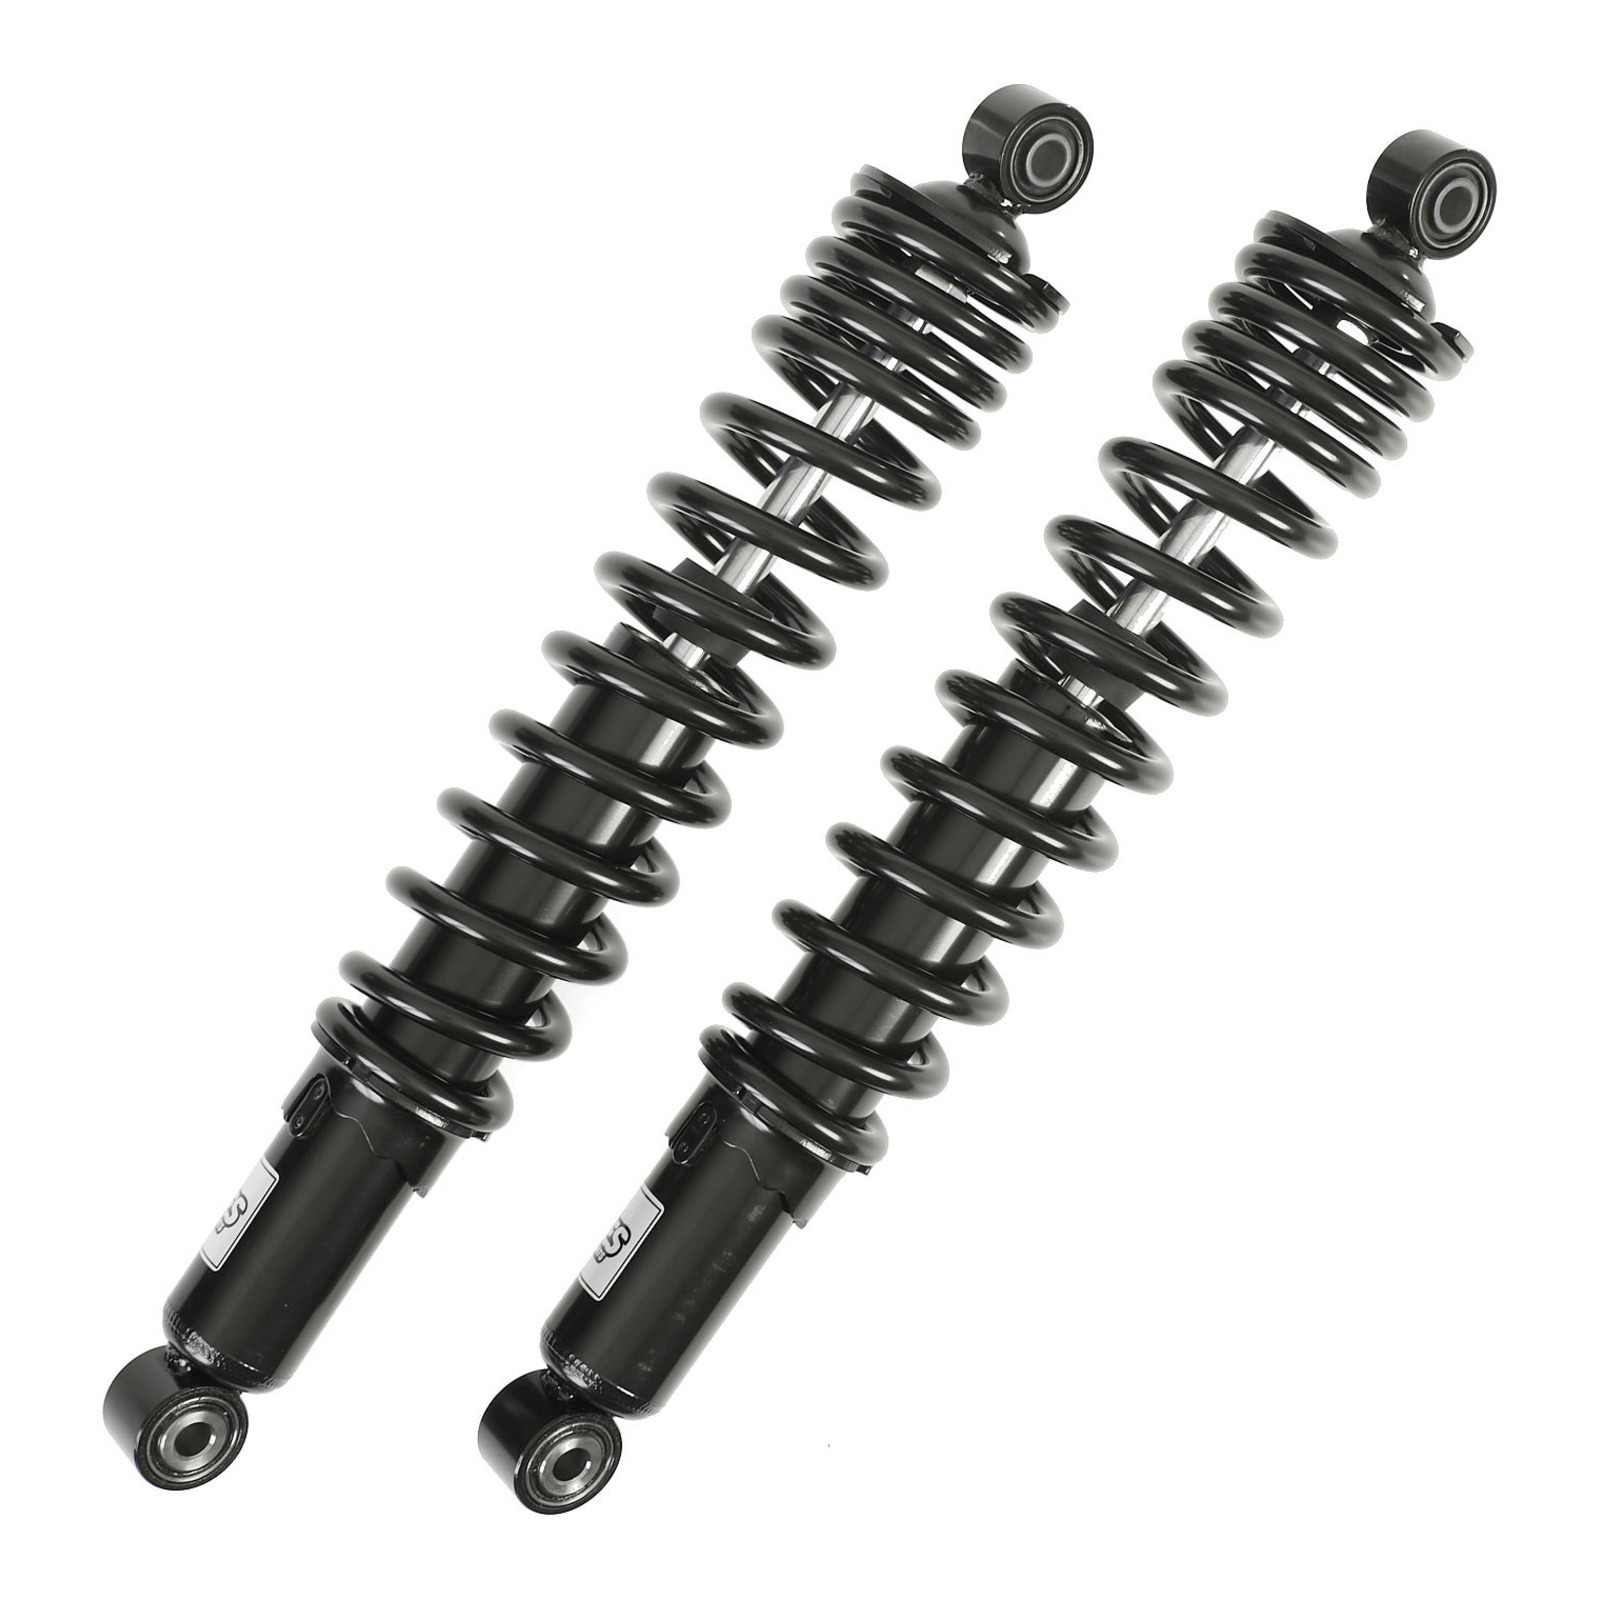 WHITES SHOCK ABSORBERS HON TRX420FM FRONT '14-'17 - PAIR